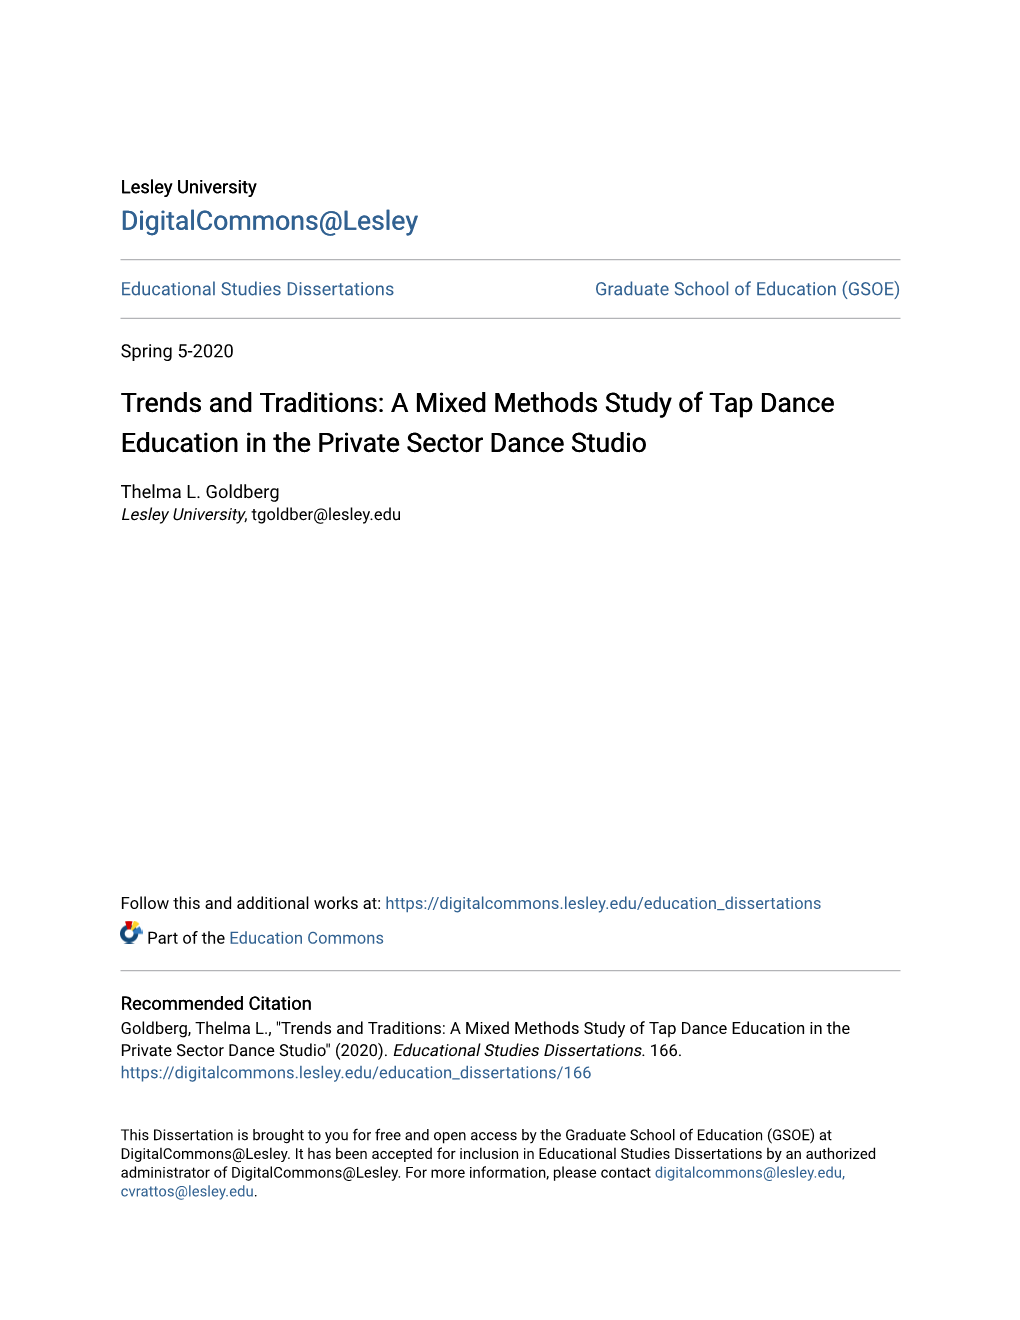 Trends and Traditions: a Mixed Methods Study of Tap Dance Education in the Private Sector Dance Studio